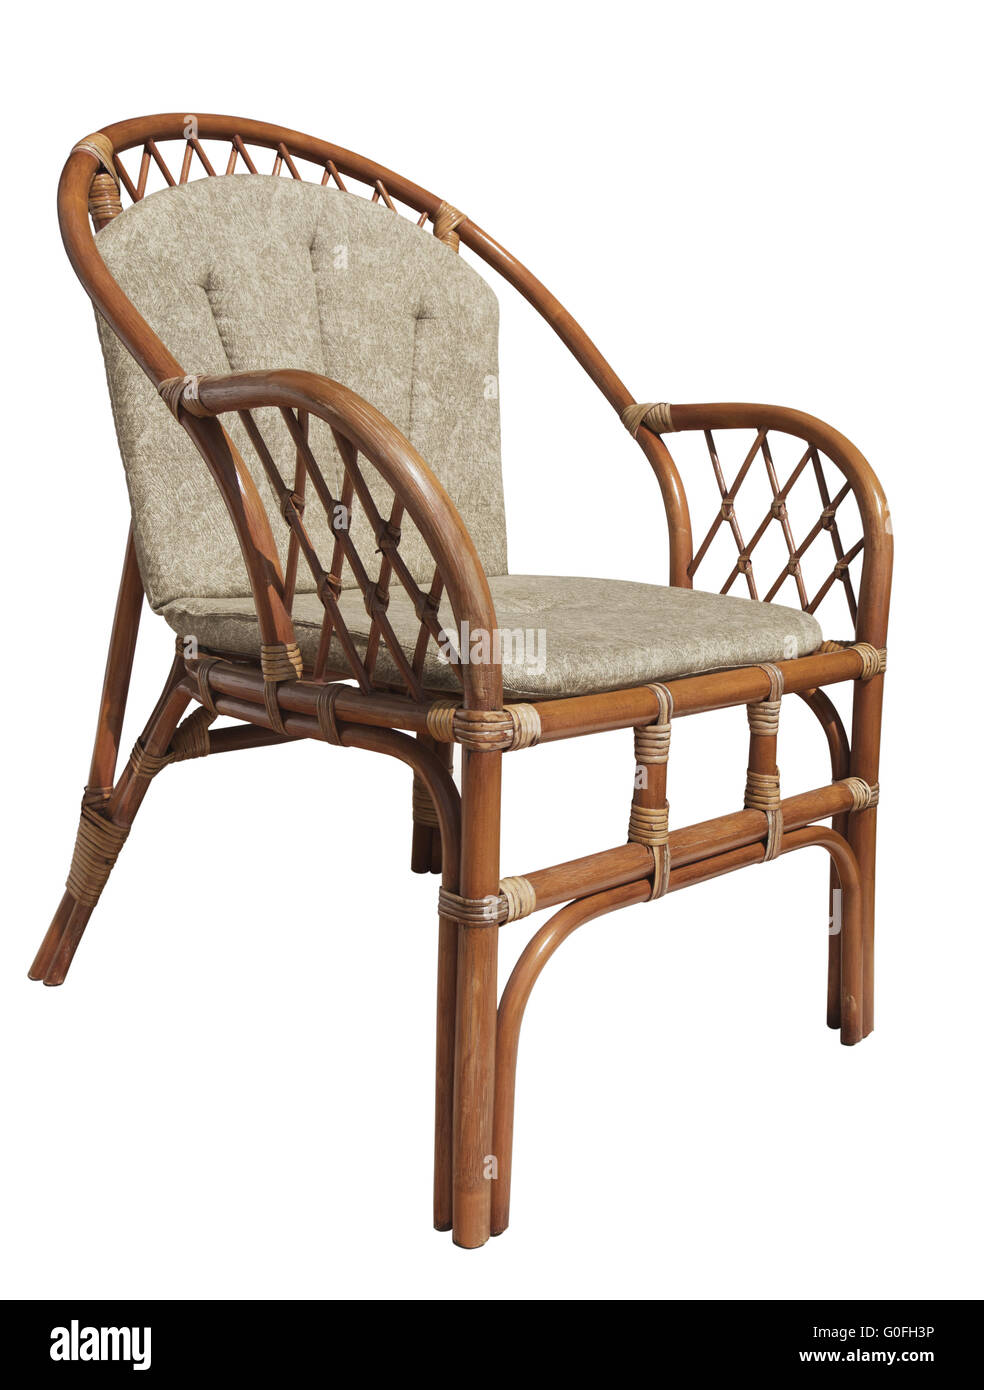 Brown wicker chair isolated over white background Stock Photo